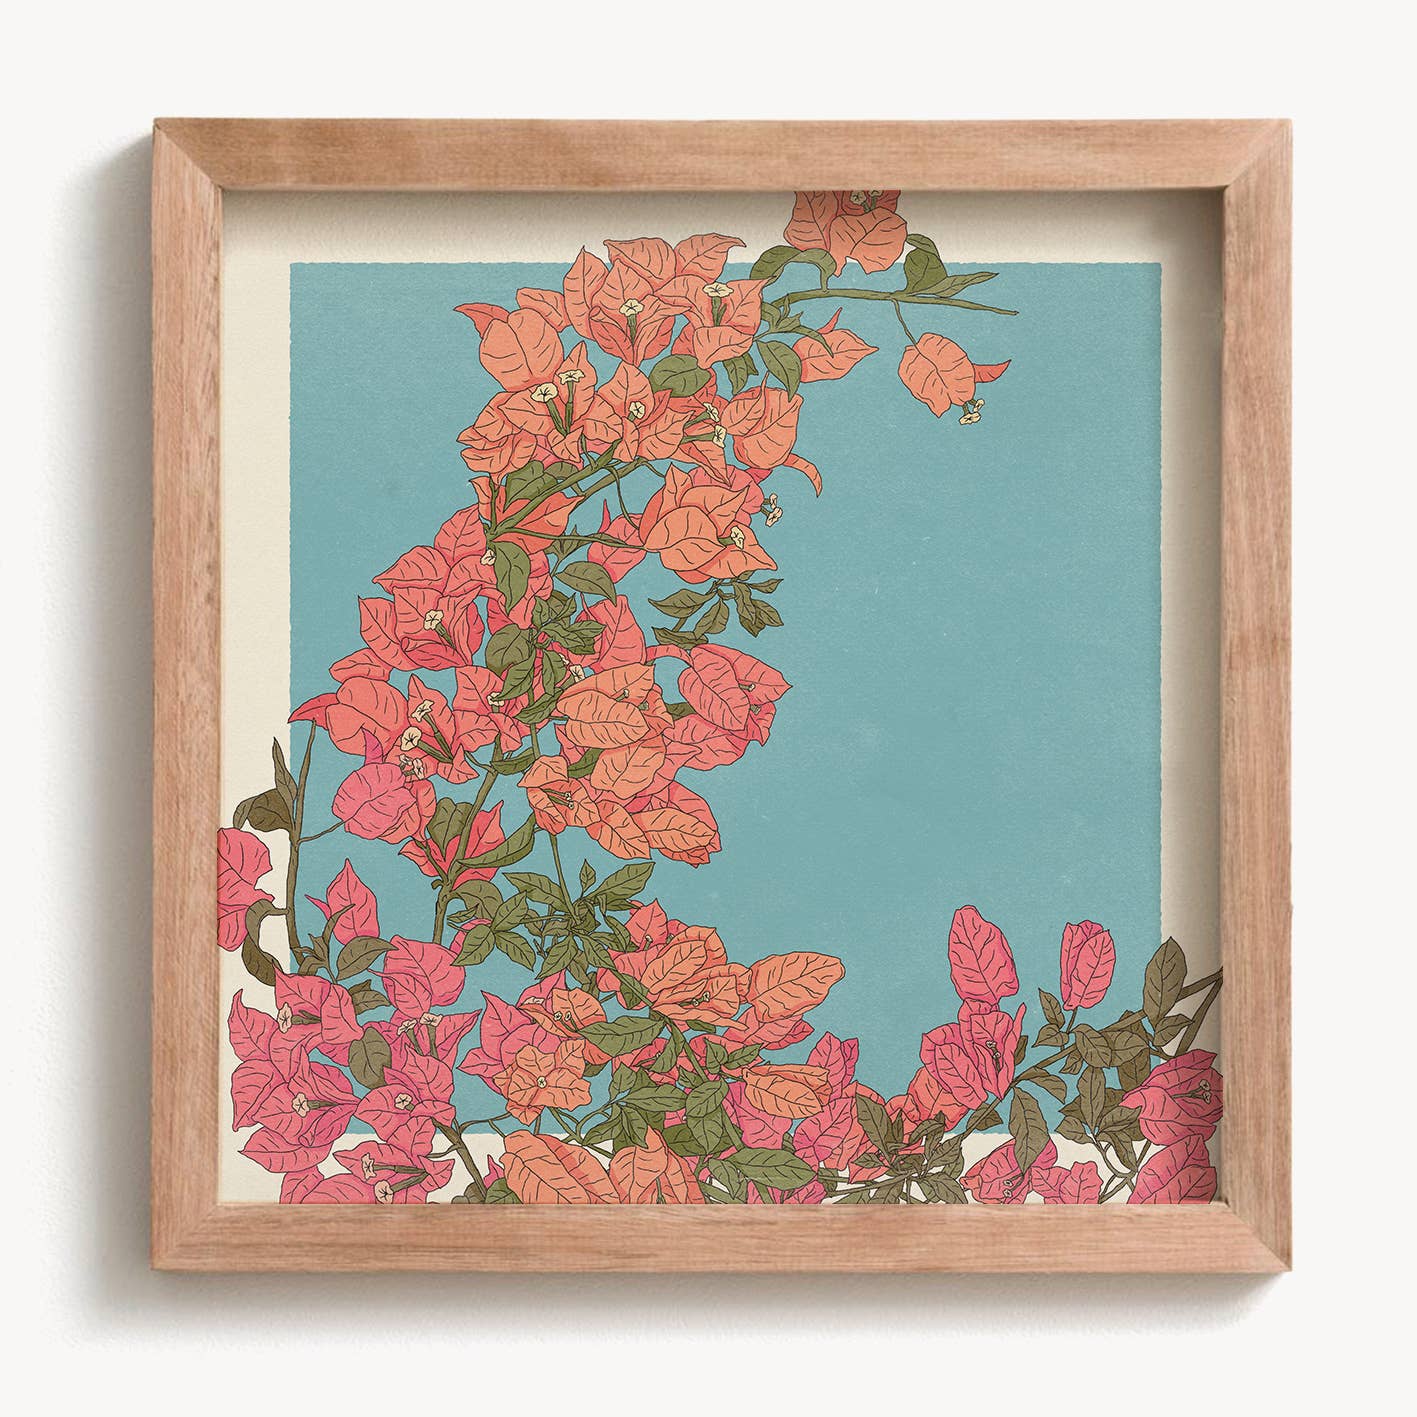 Bougainvillea Print - Out of the Blue